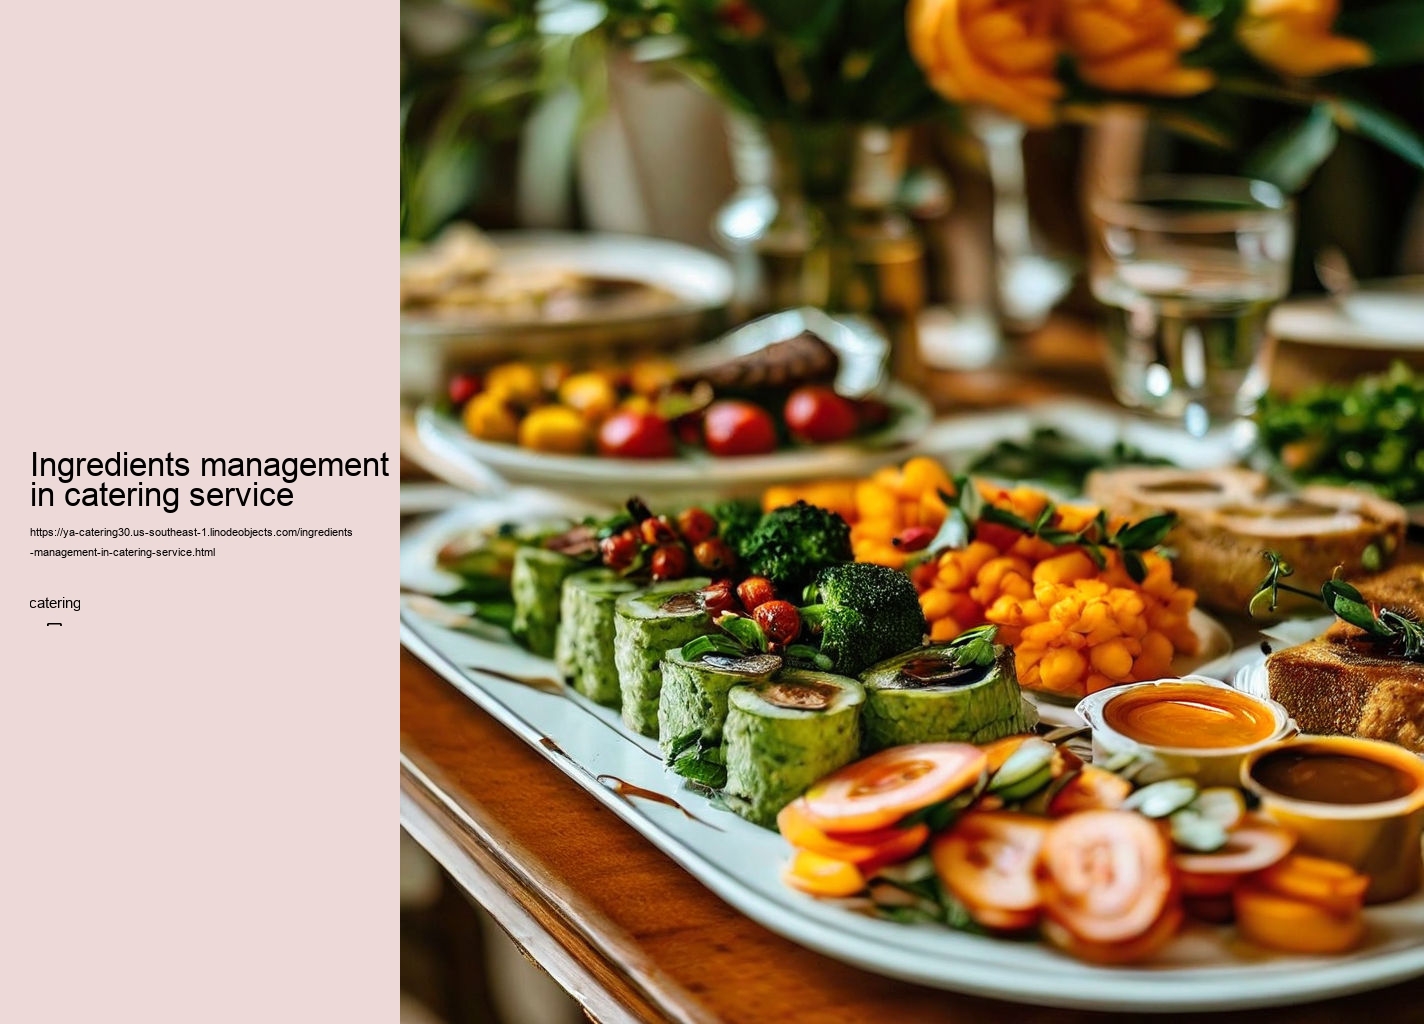 Ingredients management in catering service